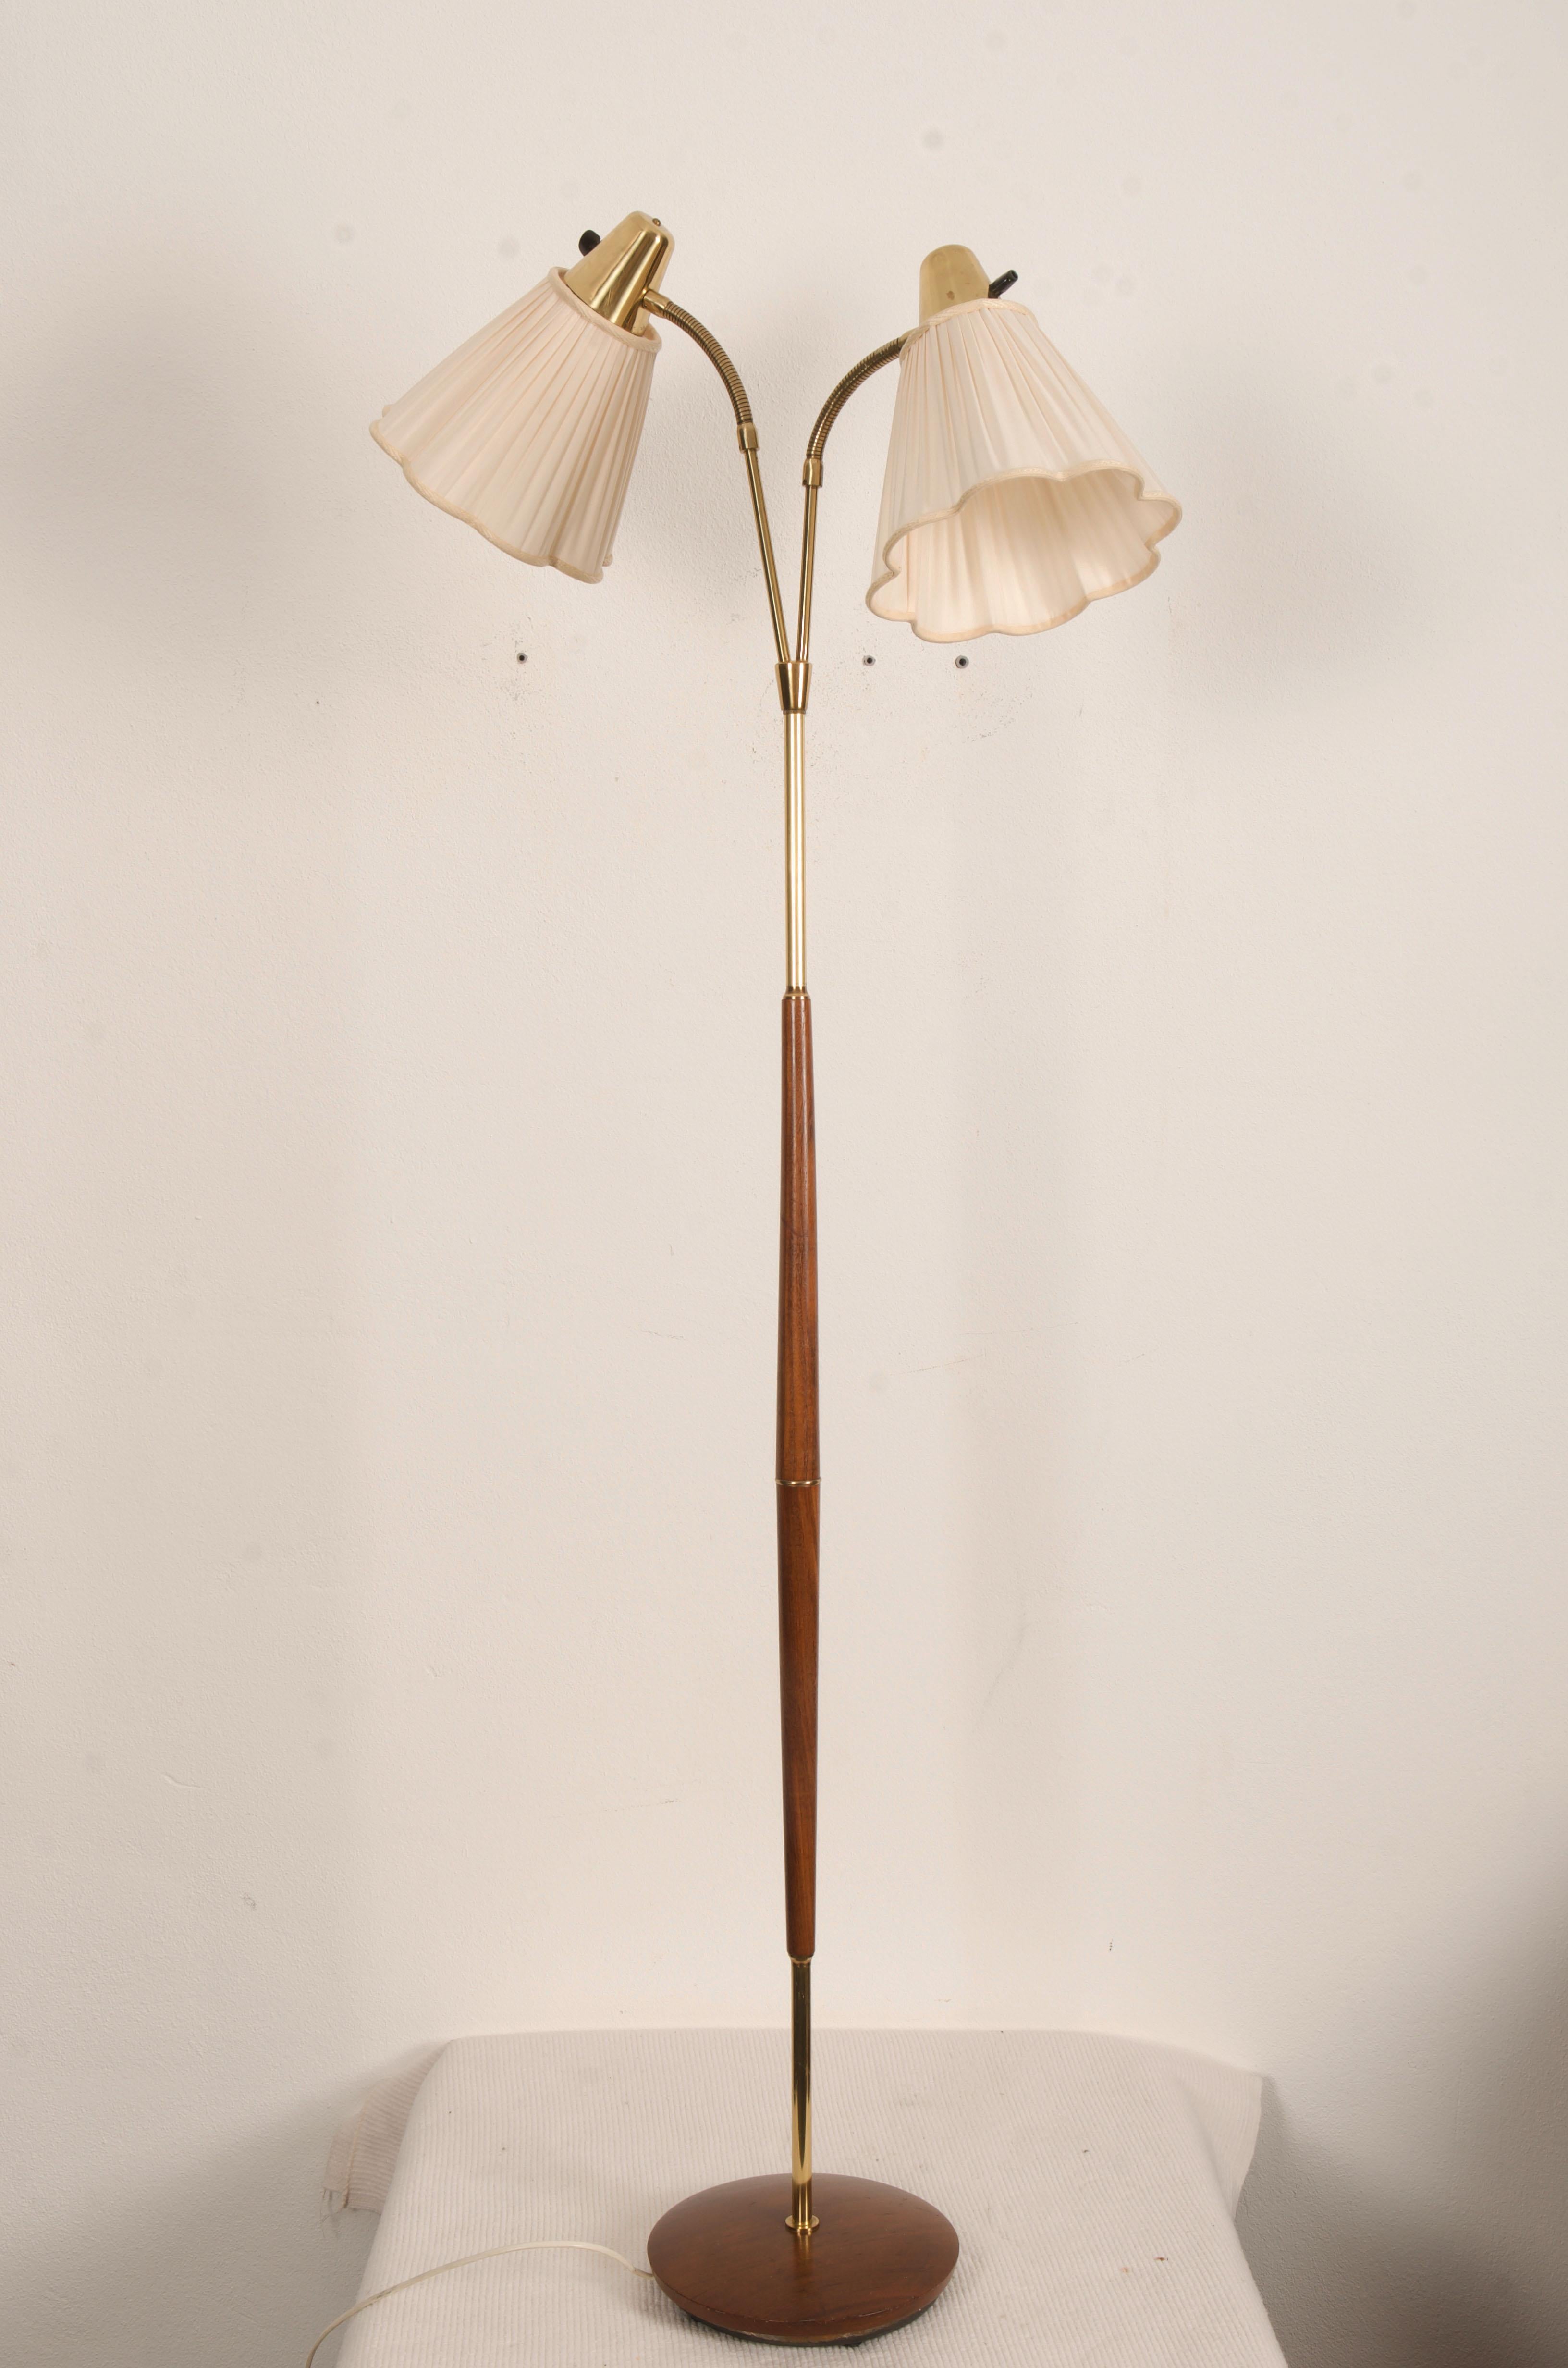 Rare Floor Lamp by Hans Bergström for Ateljé Lyktan from the 1950s 10